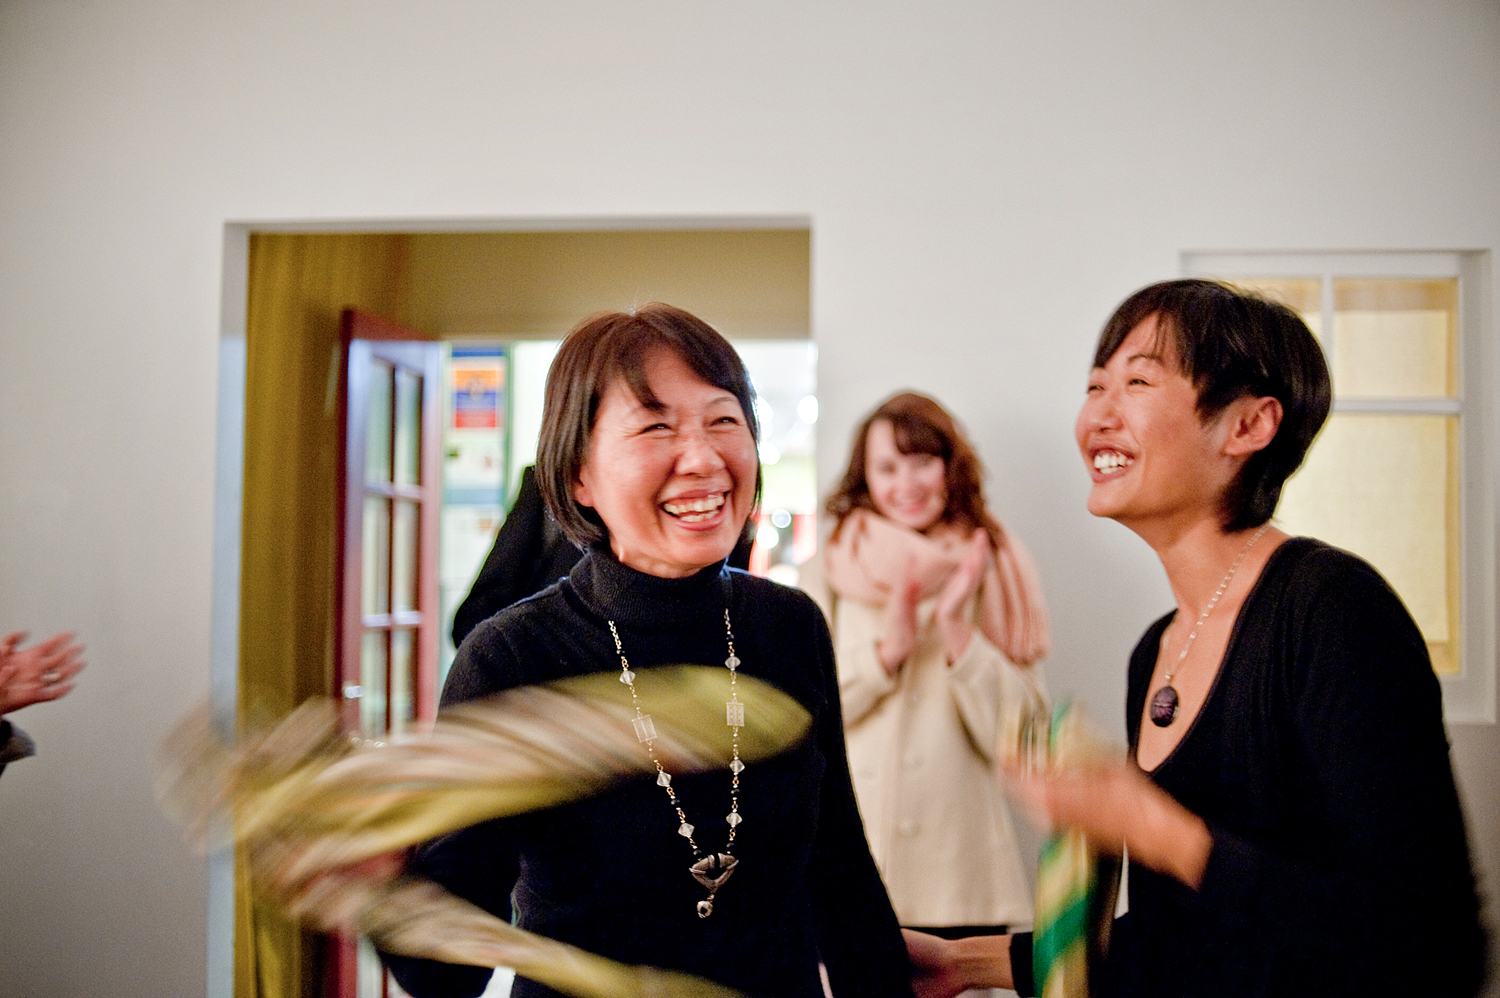 Meeting my mother (2009) by Annie Onyi Cheung, photo by David Reyes